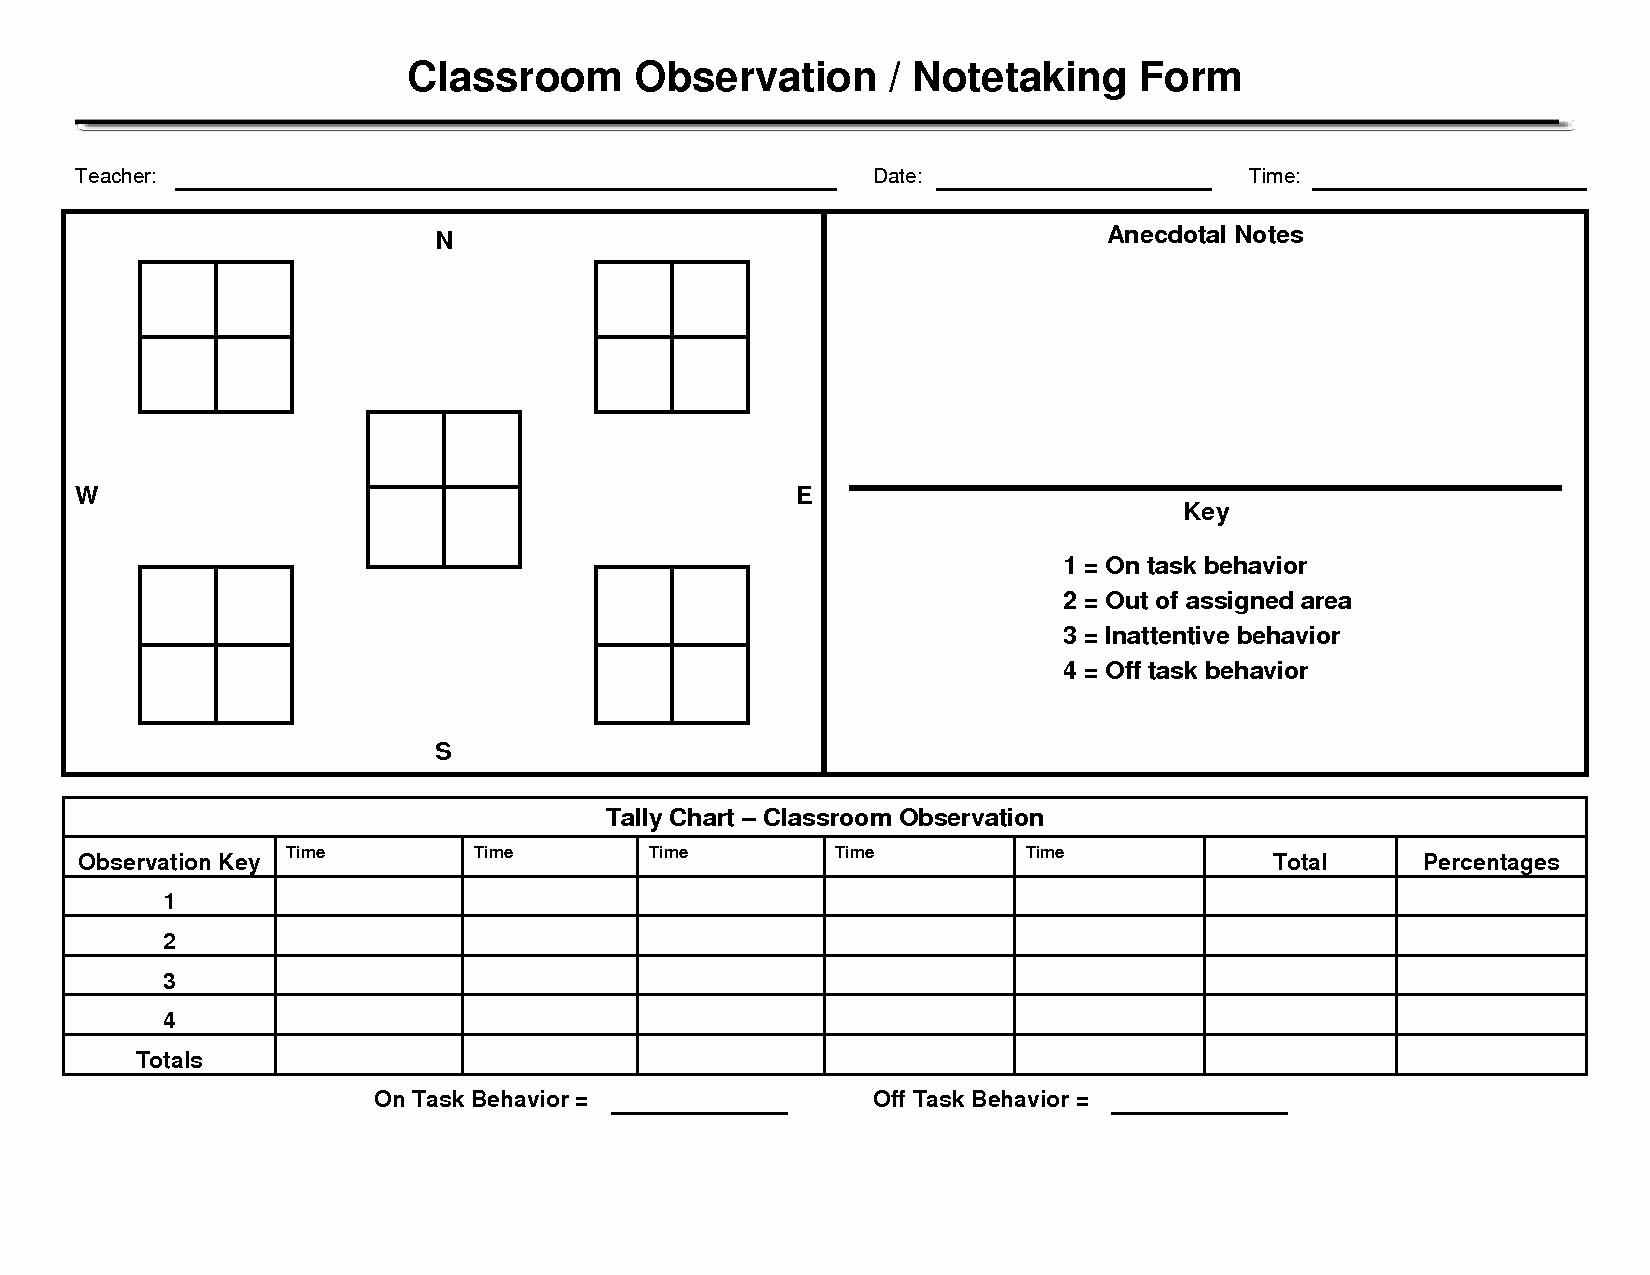 Seating Charts Templates for Classrooms Unique Seating Chart Template for Classroom